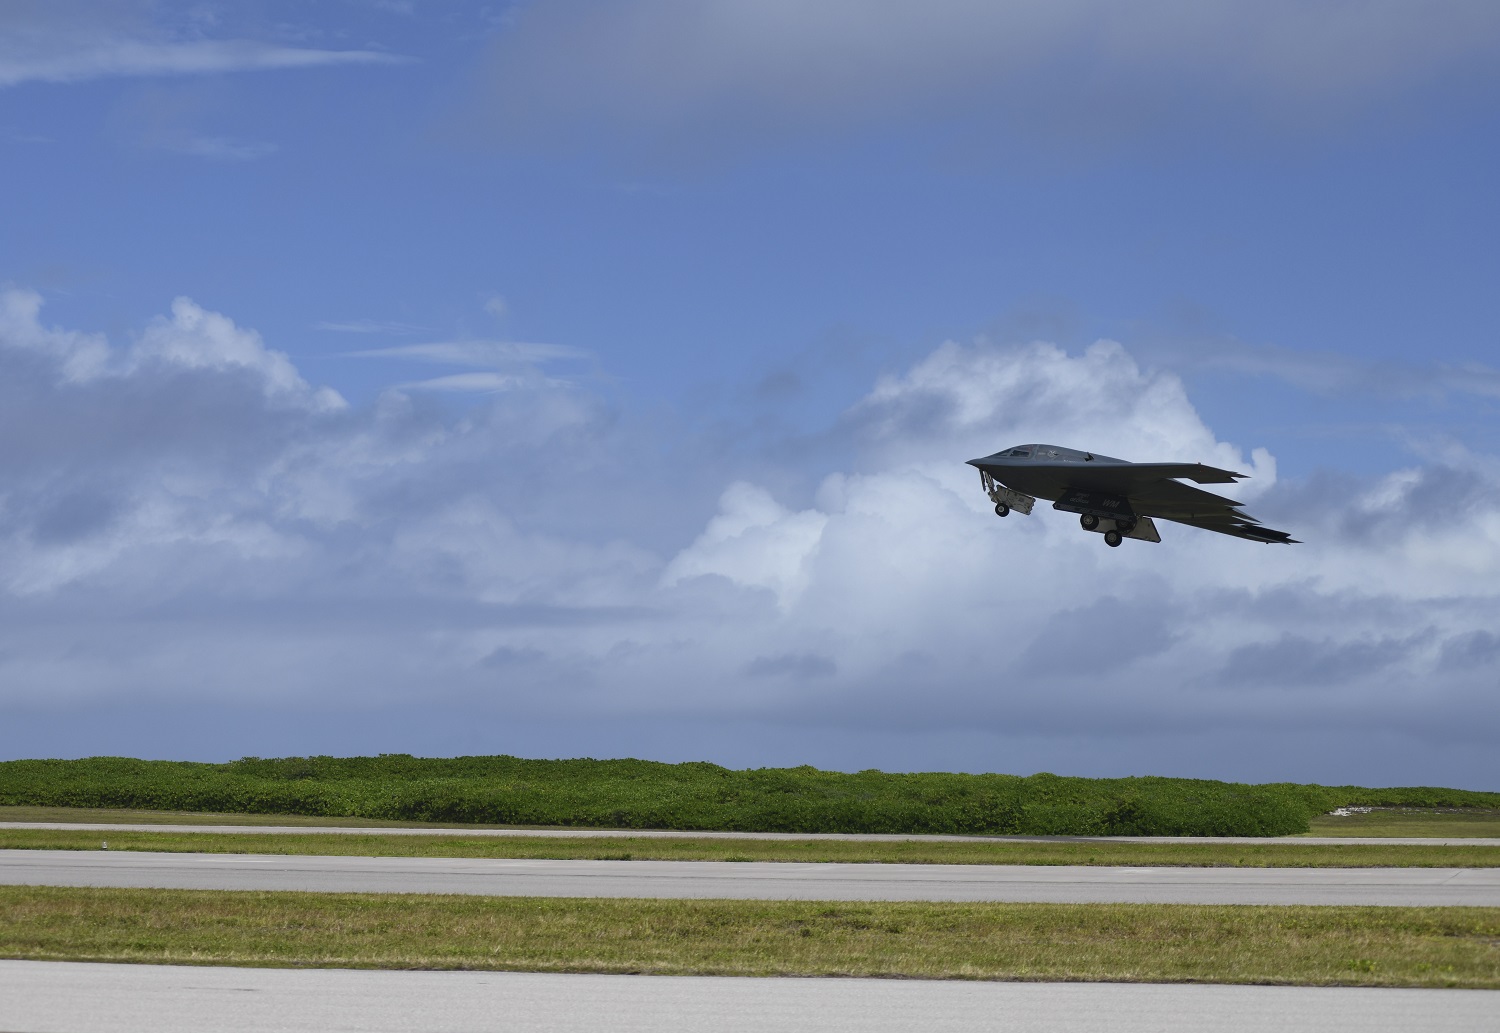  A B-2 Spirit Stealth Bomber, deployed from Whiteman Air Force Base, Missouri, takes-off from Naval Support Facility Diego Garcia, to support a Bomber Task Force mission, Aug. 17, 2020.